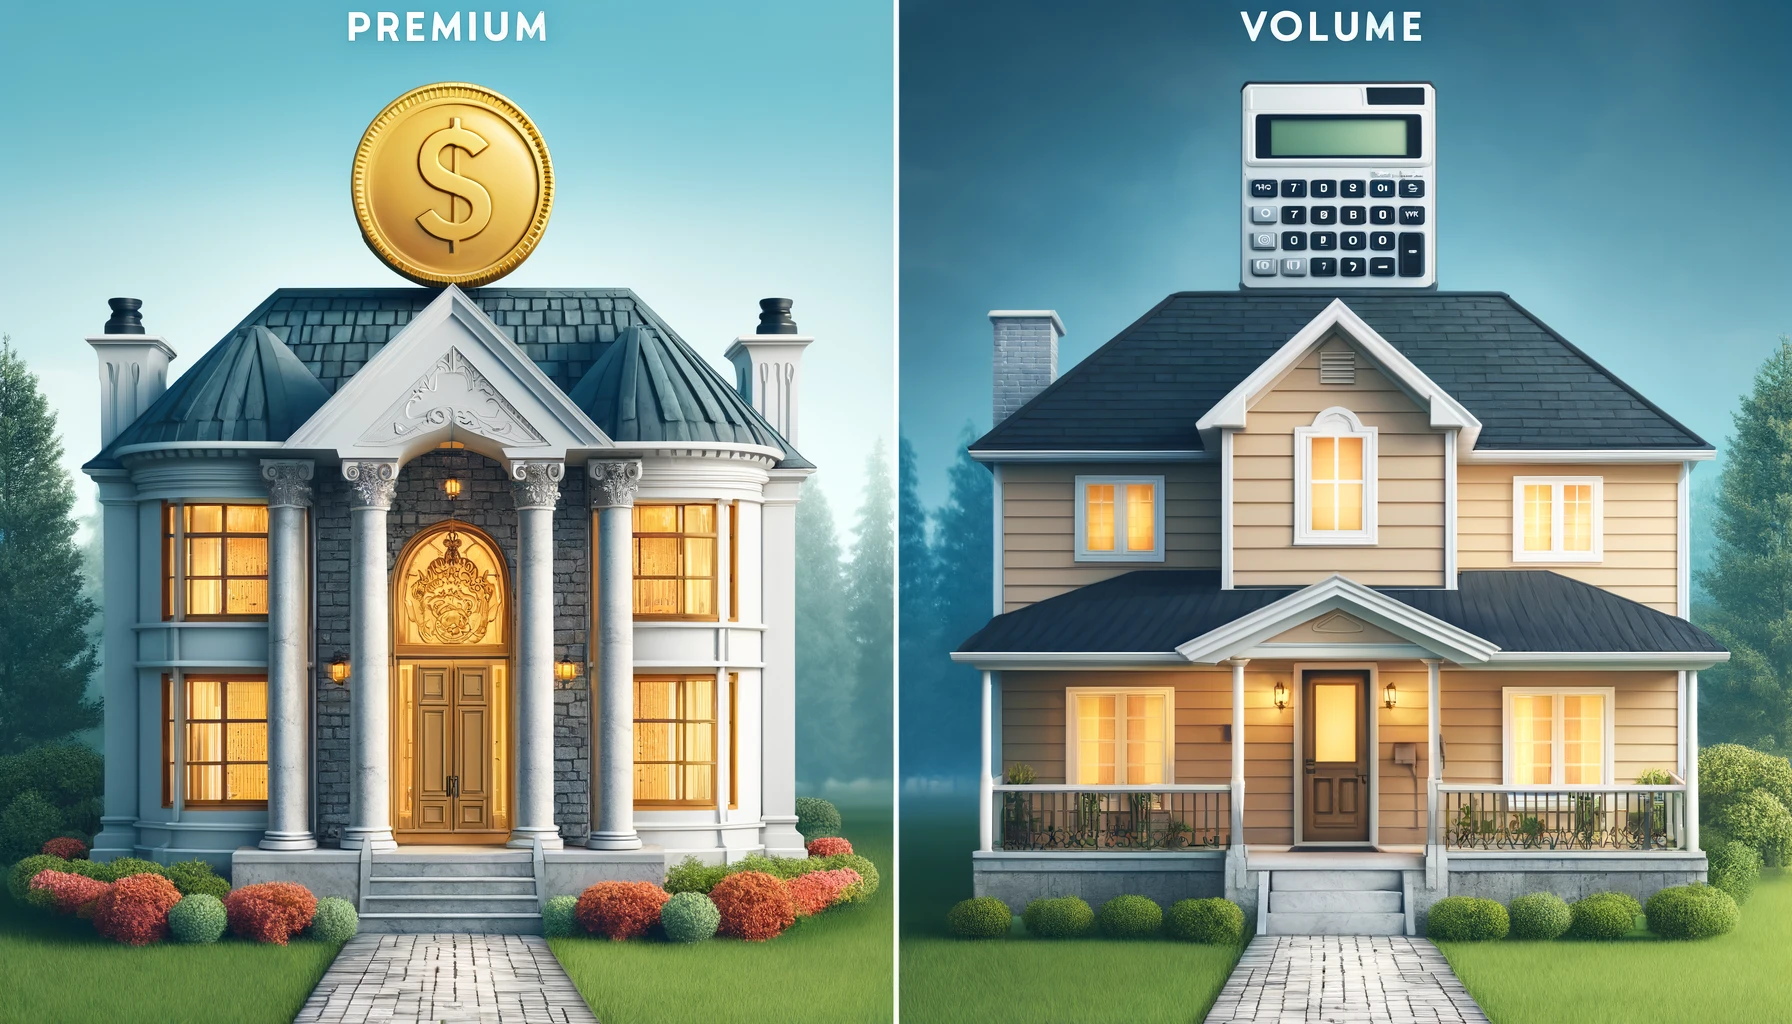 Visualize the concept of premium versus volume pricing in the remodeling industry with two homes side by side.